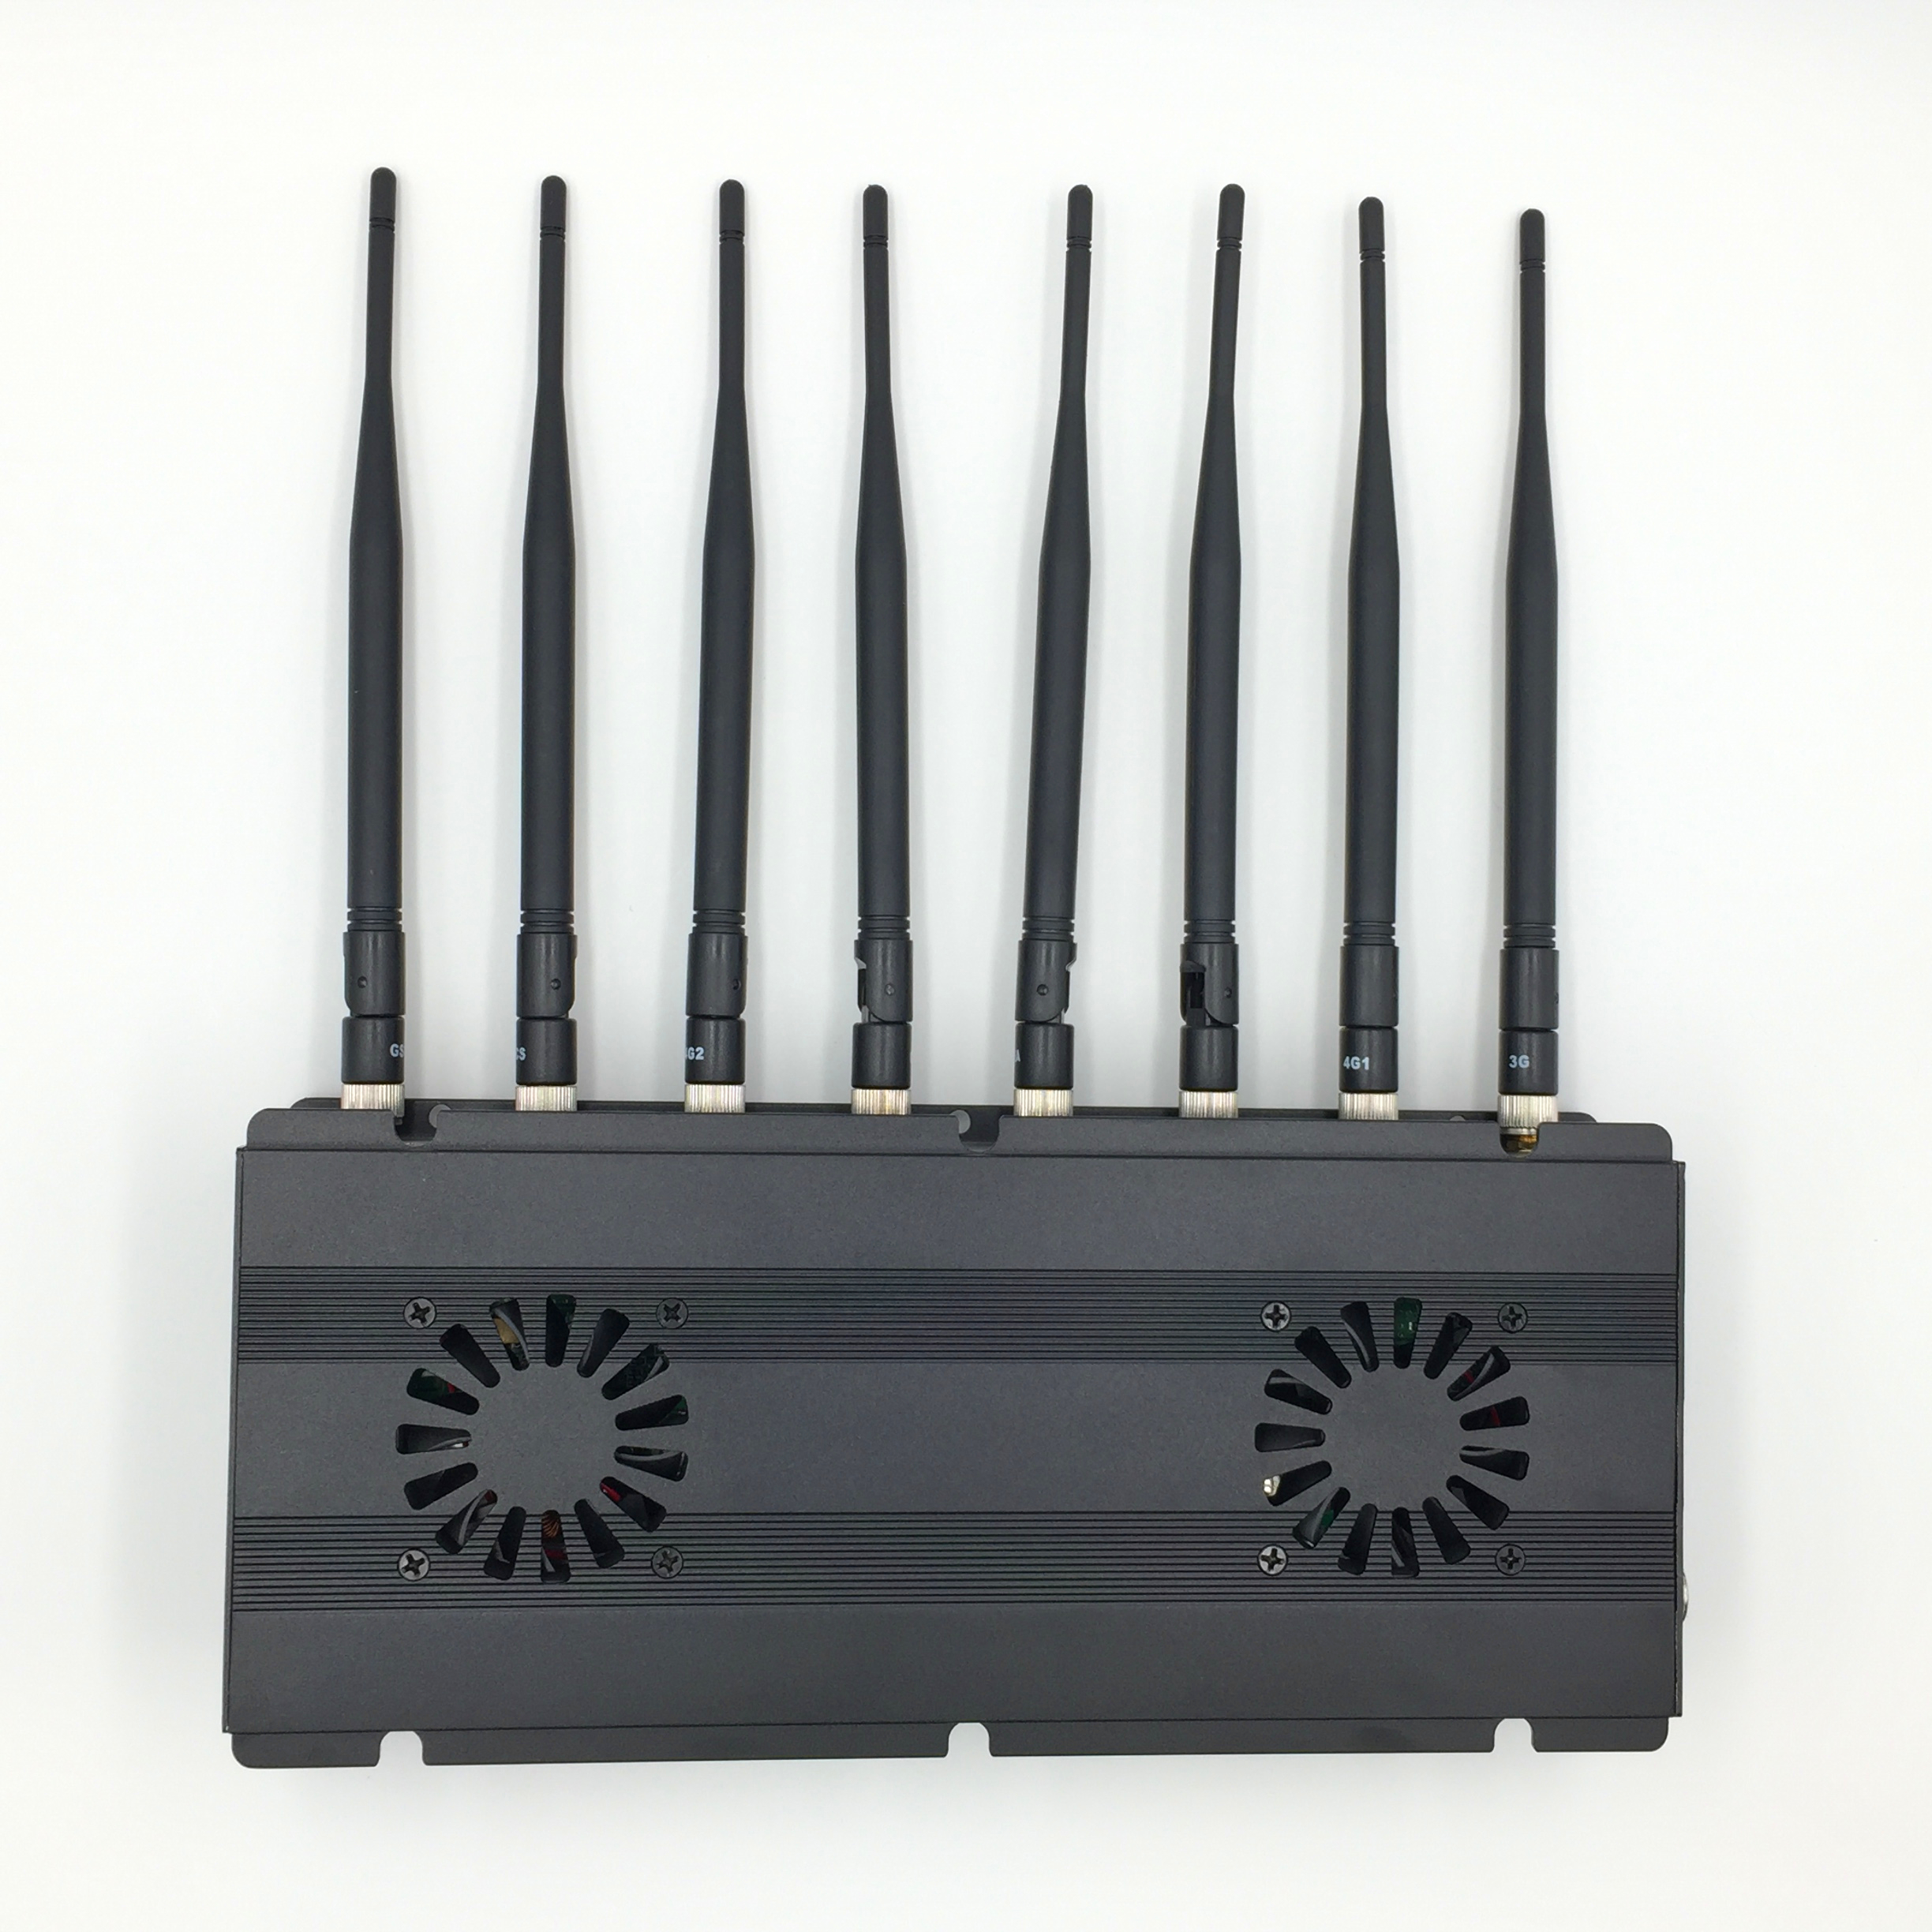 jammer legal office lackland - Black Desktop 8 Antenna Signal Jammers With GSM 3G 4G GPS WiFi LOJACK